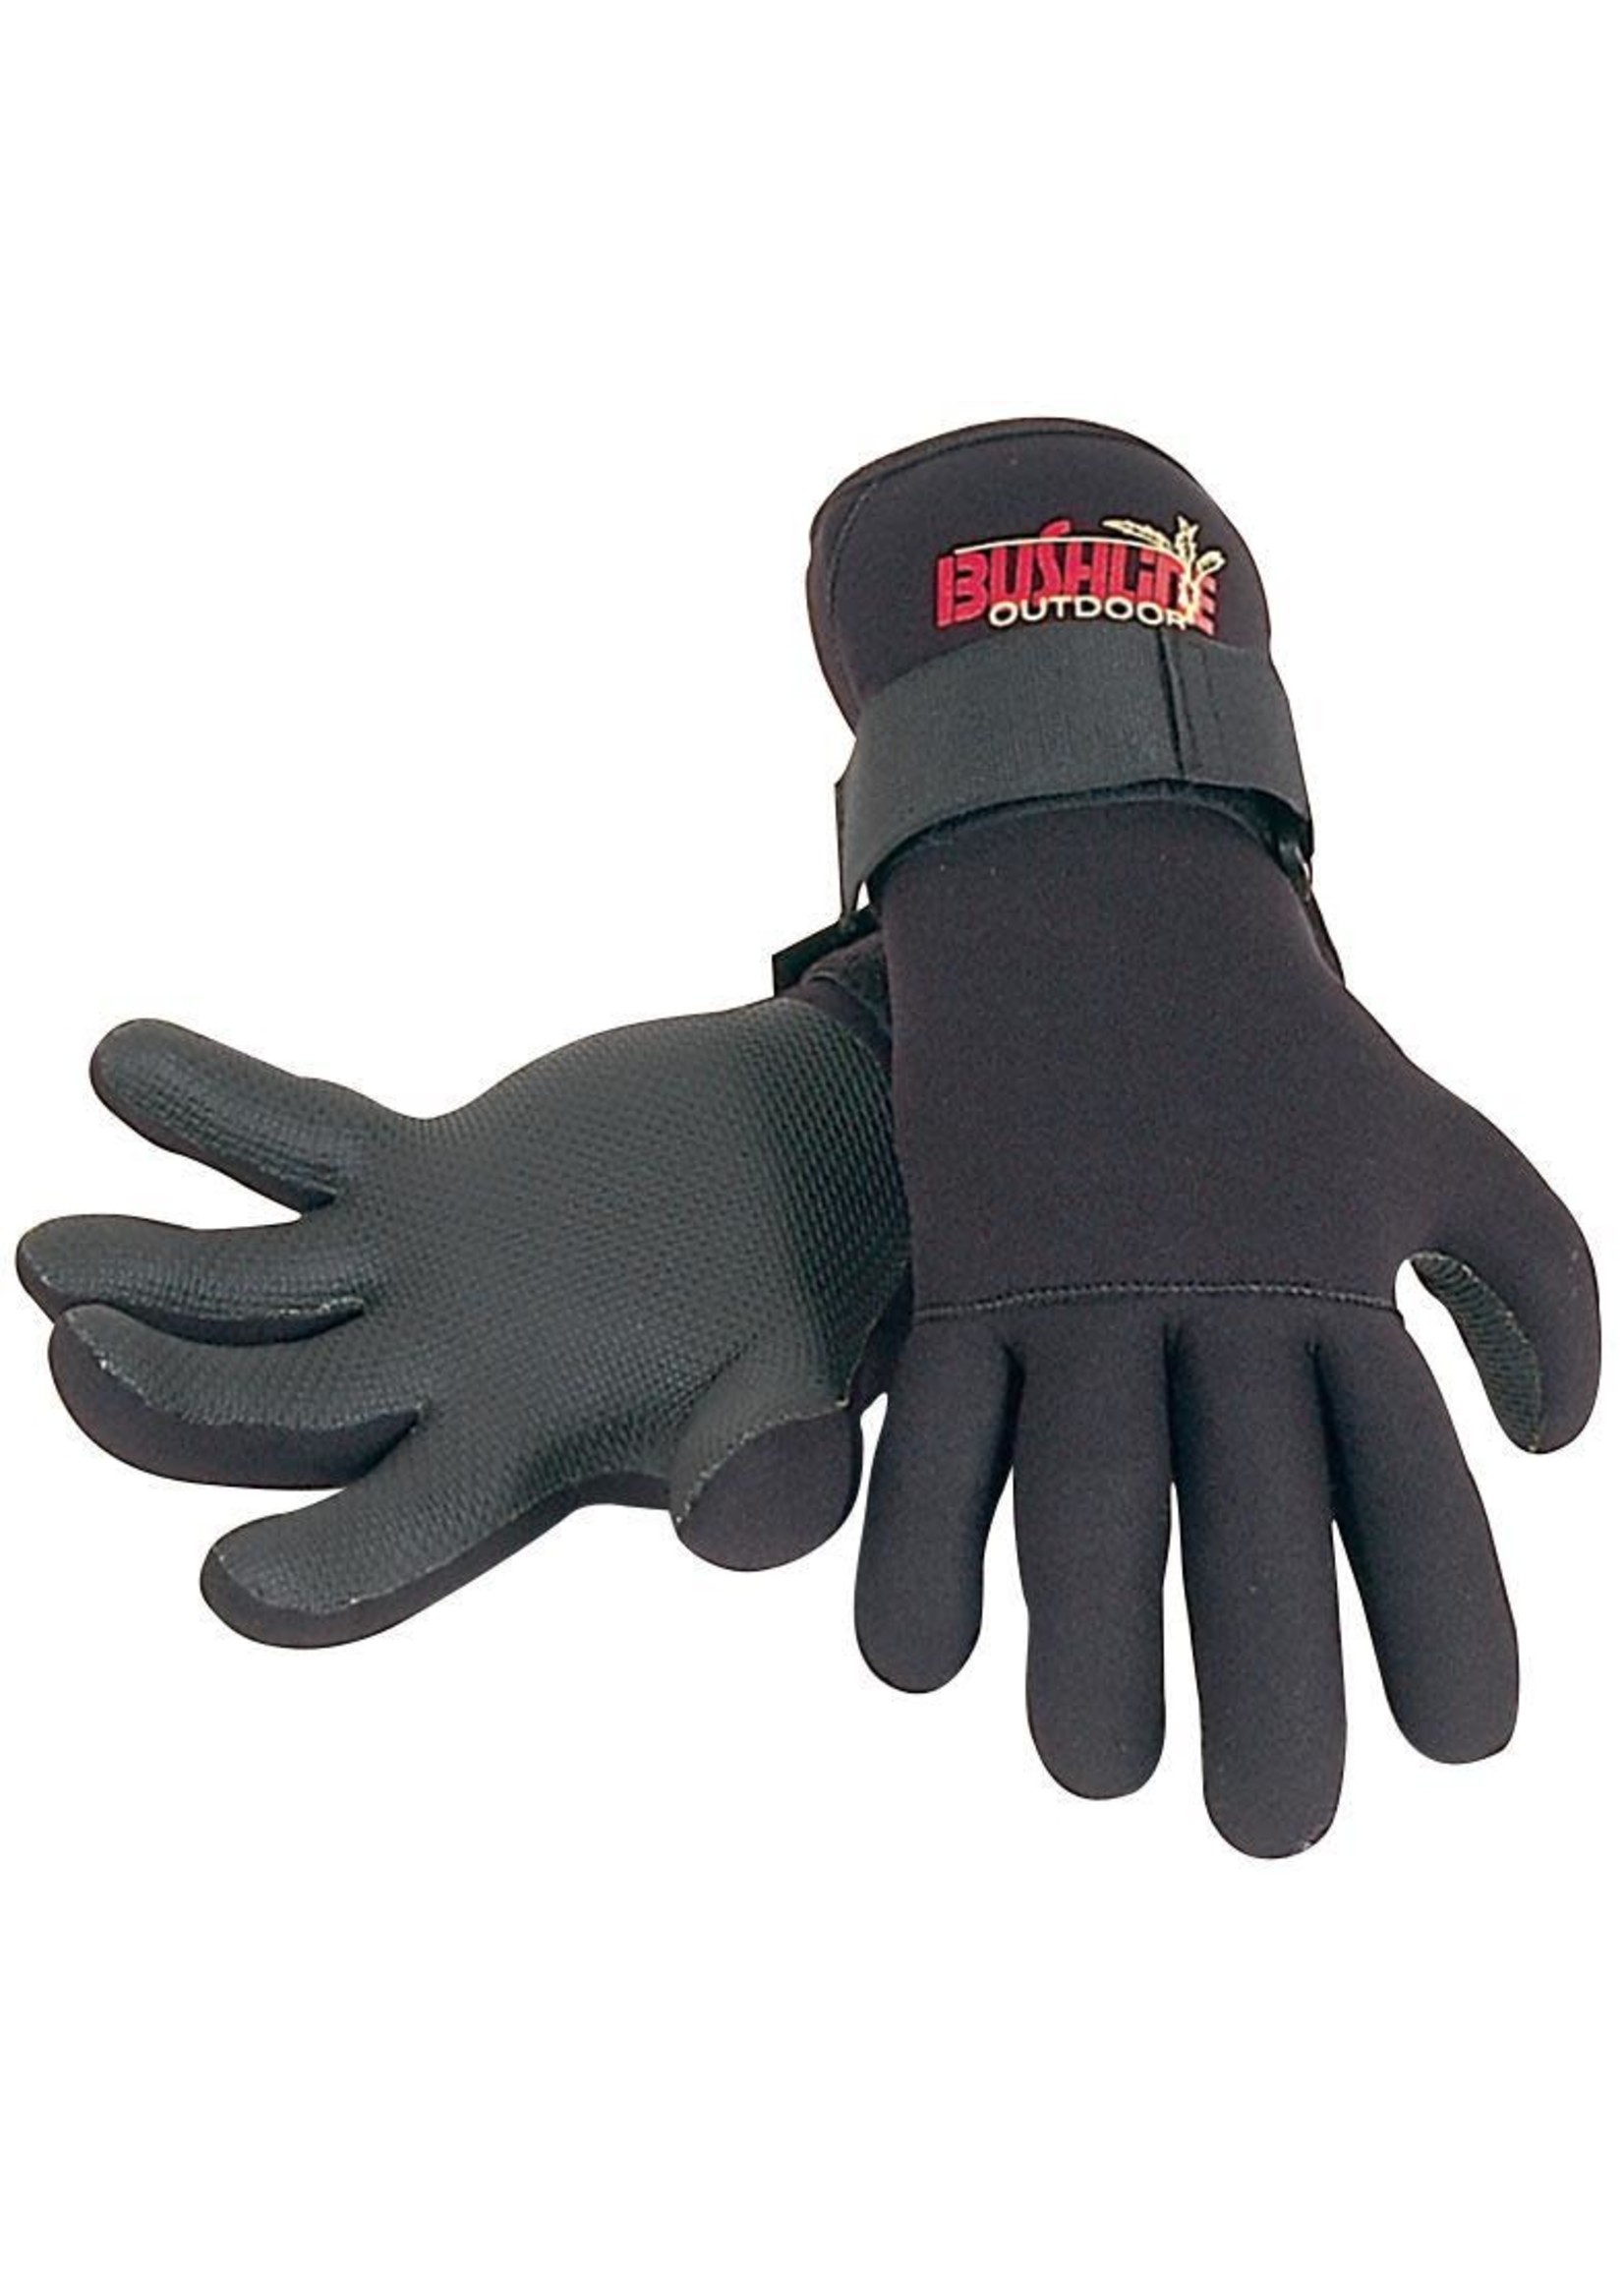 Neoprene Fishing Gloves Large-Extra Large - Pure Outdoors